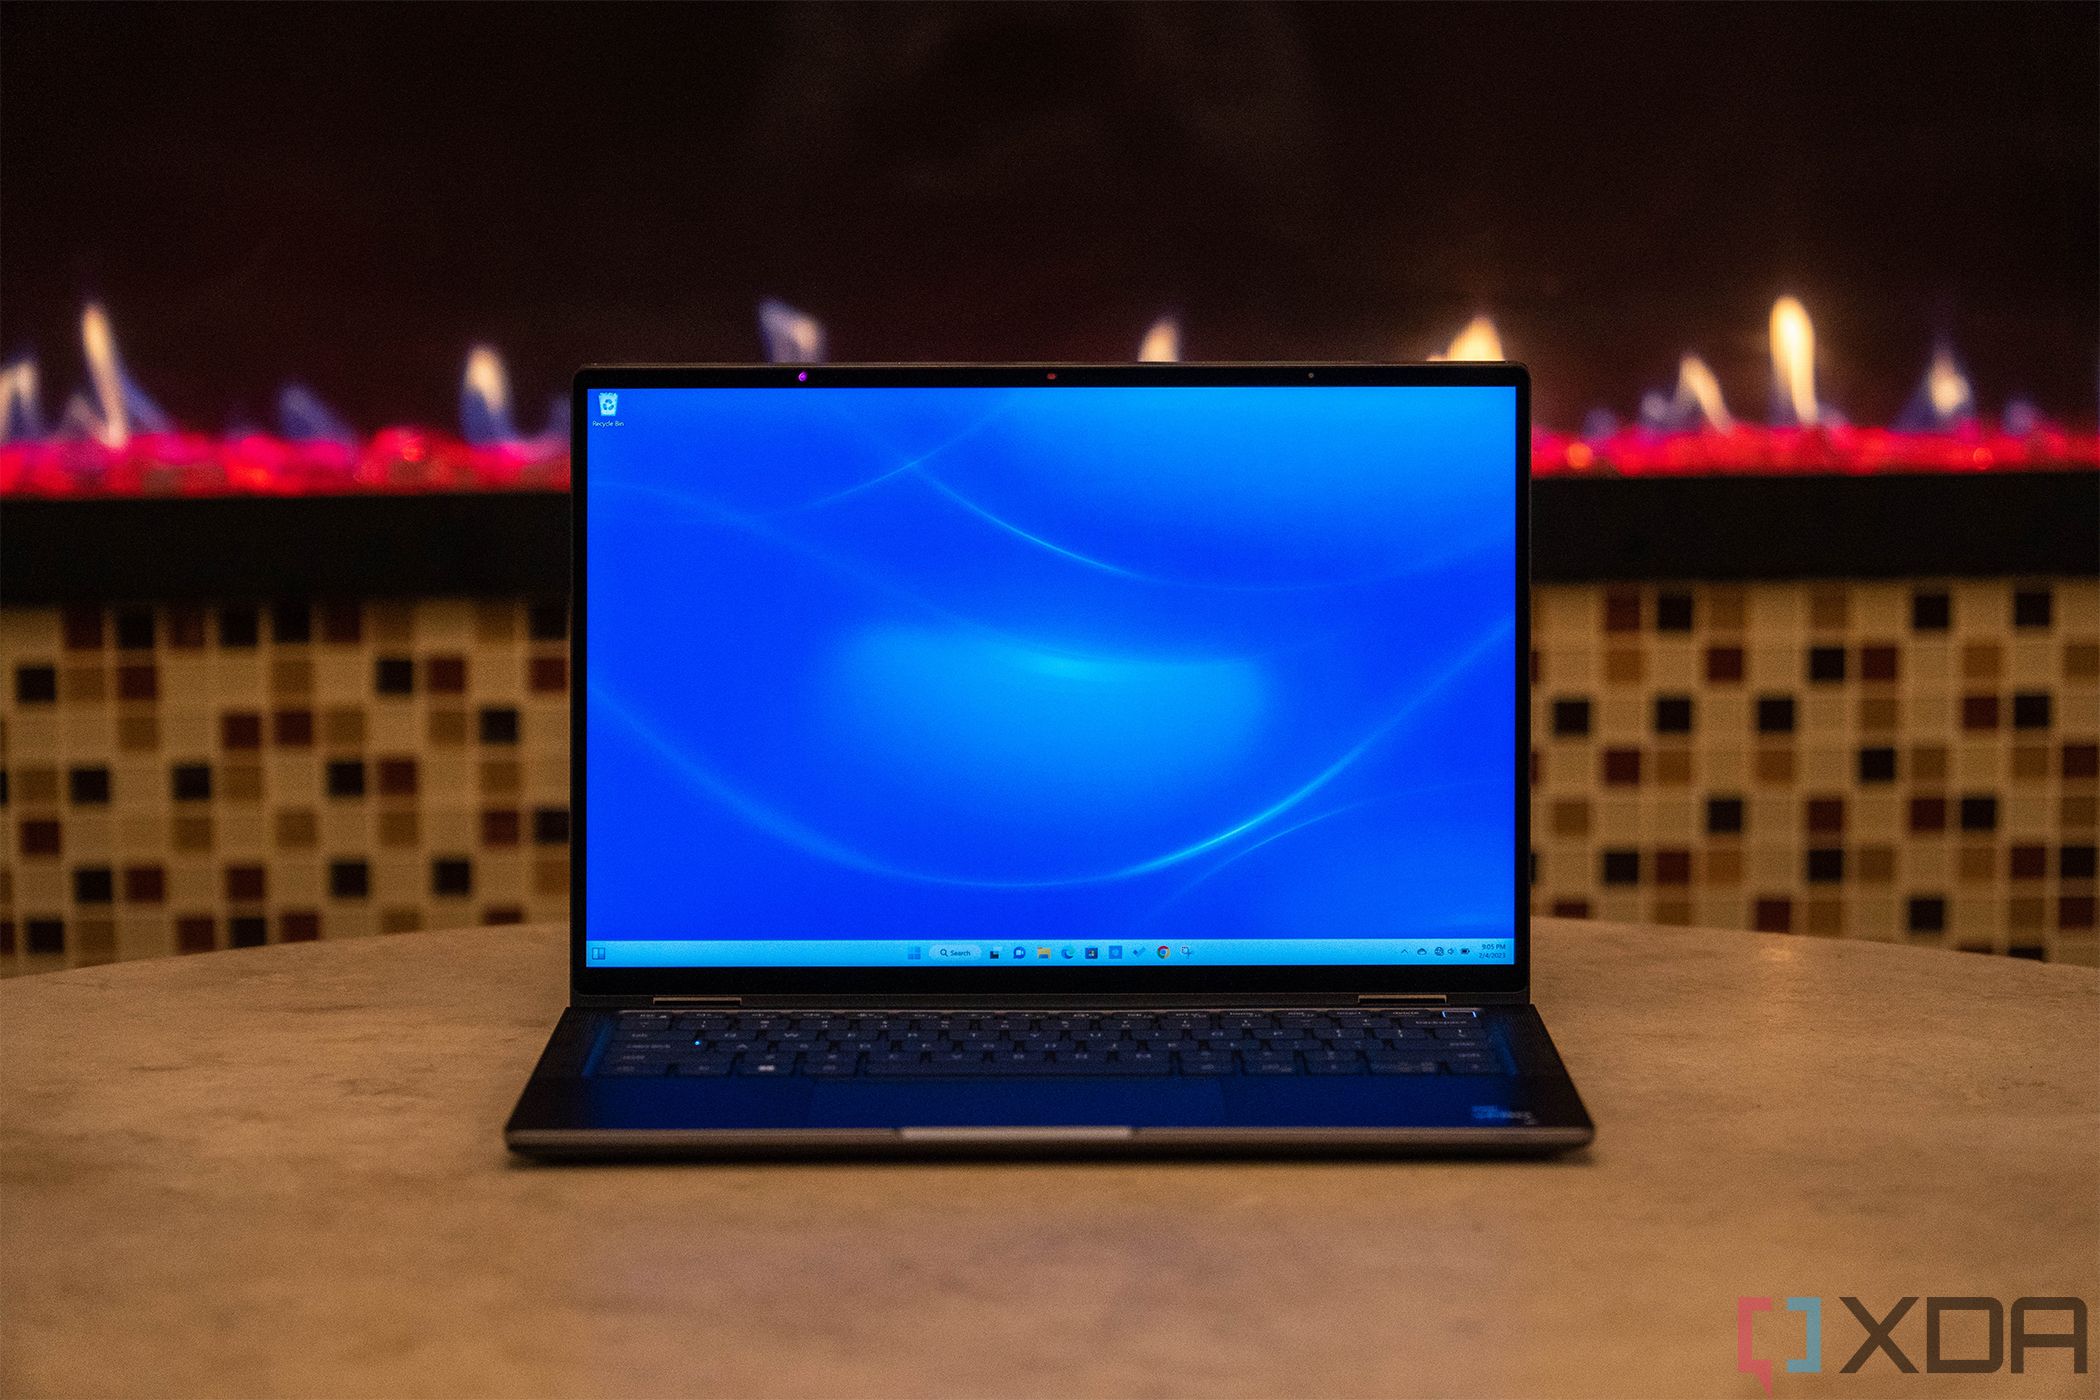 Front view of laptop in front of red fireplace